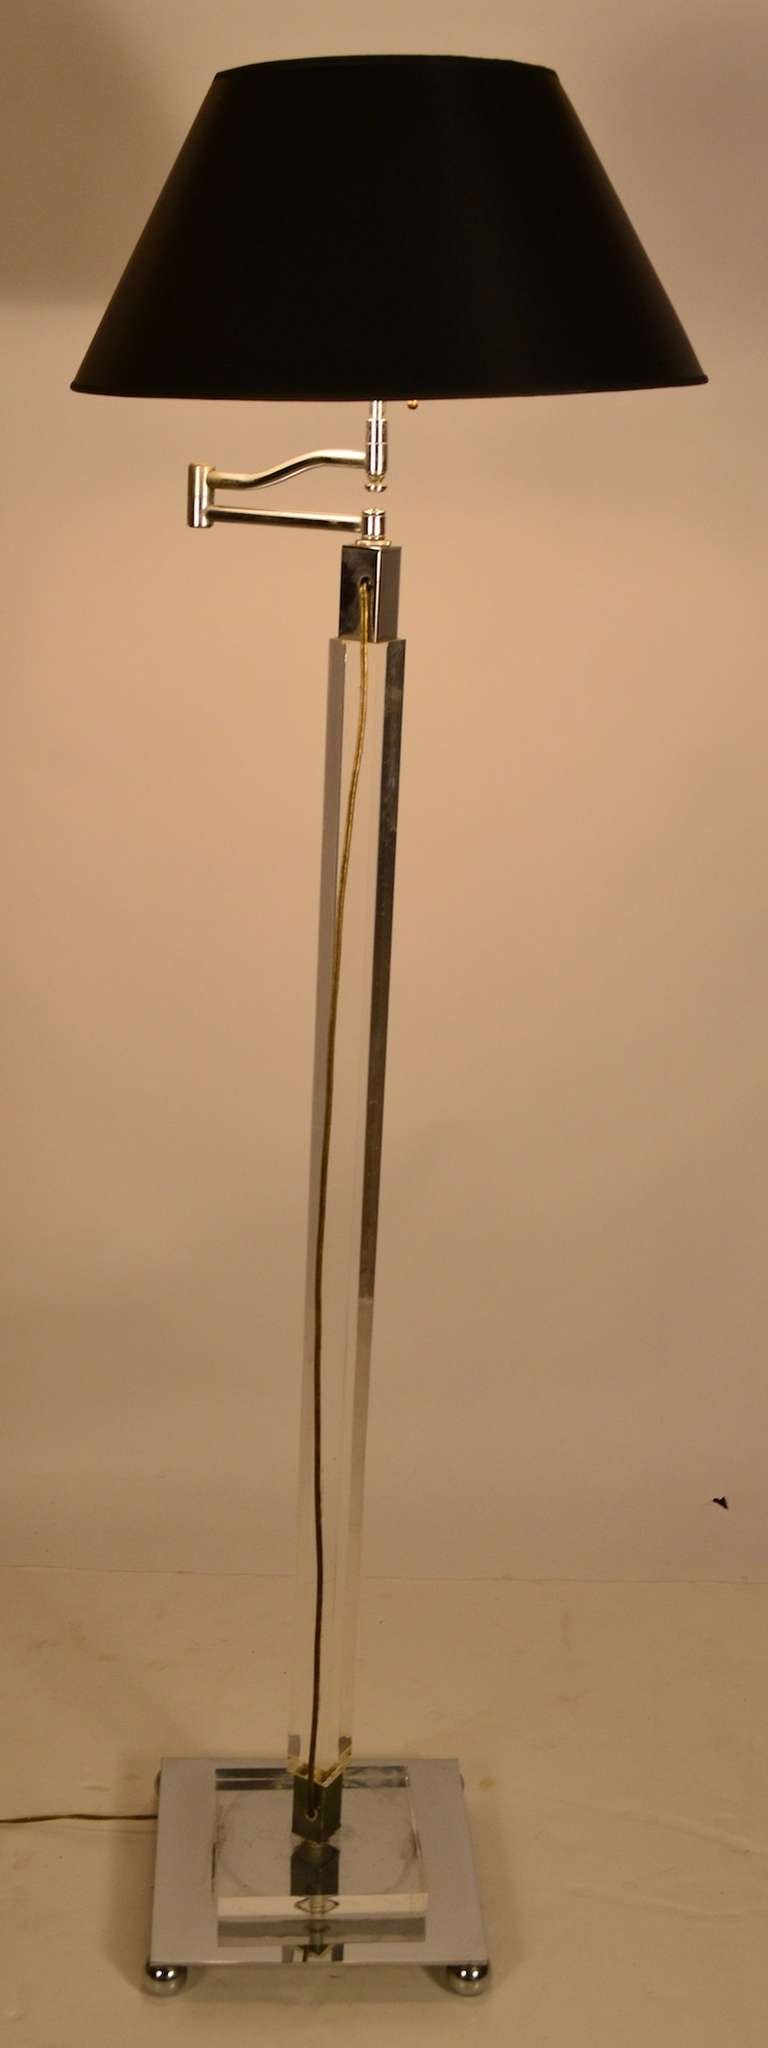 Mid-20th Century Lucite and Chrome Swing Arm Floor Lamp For Sale